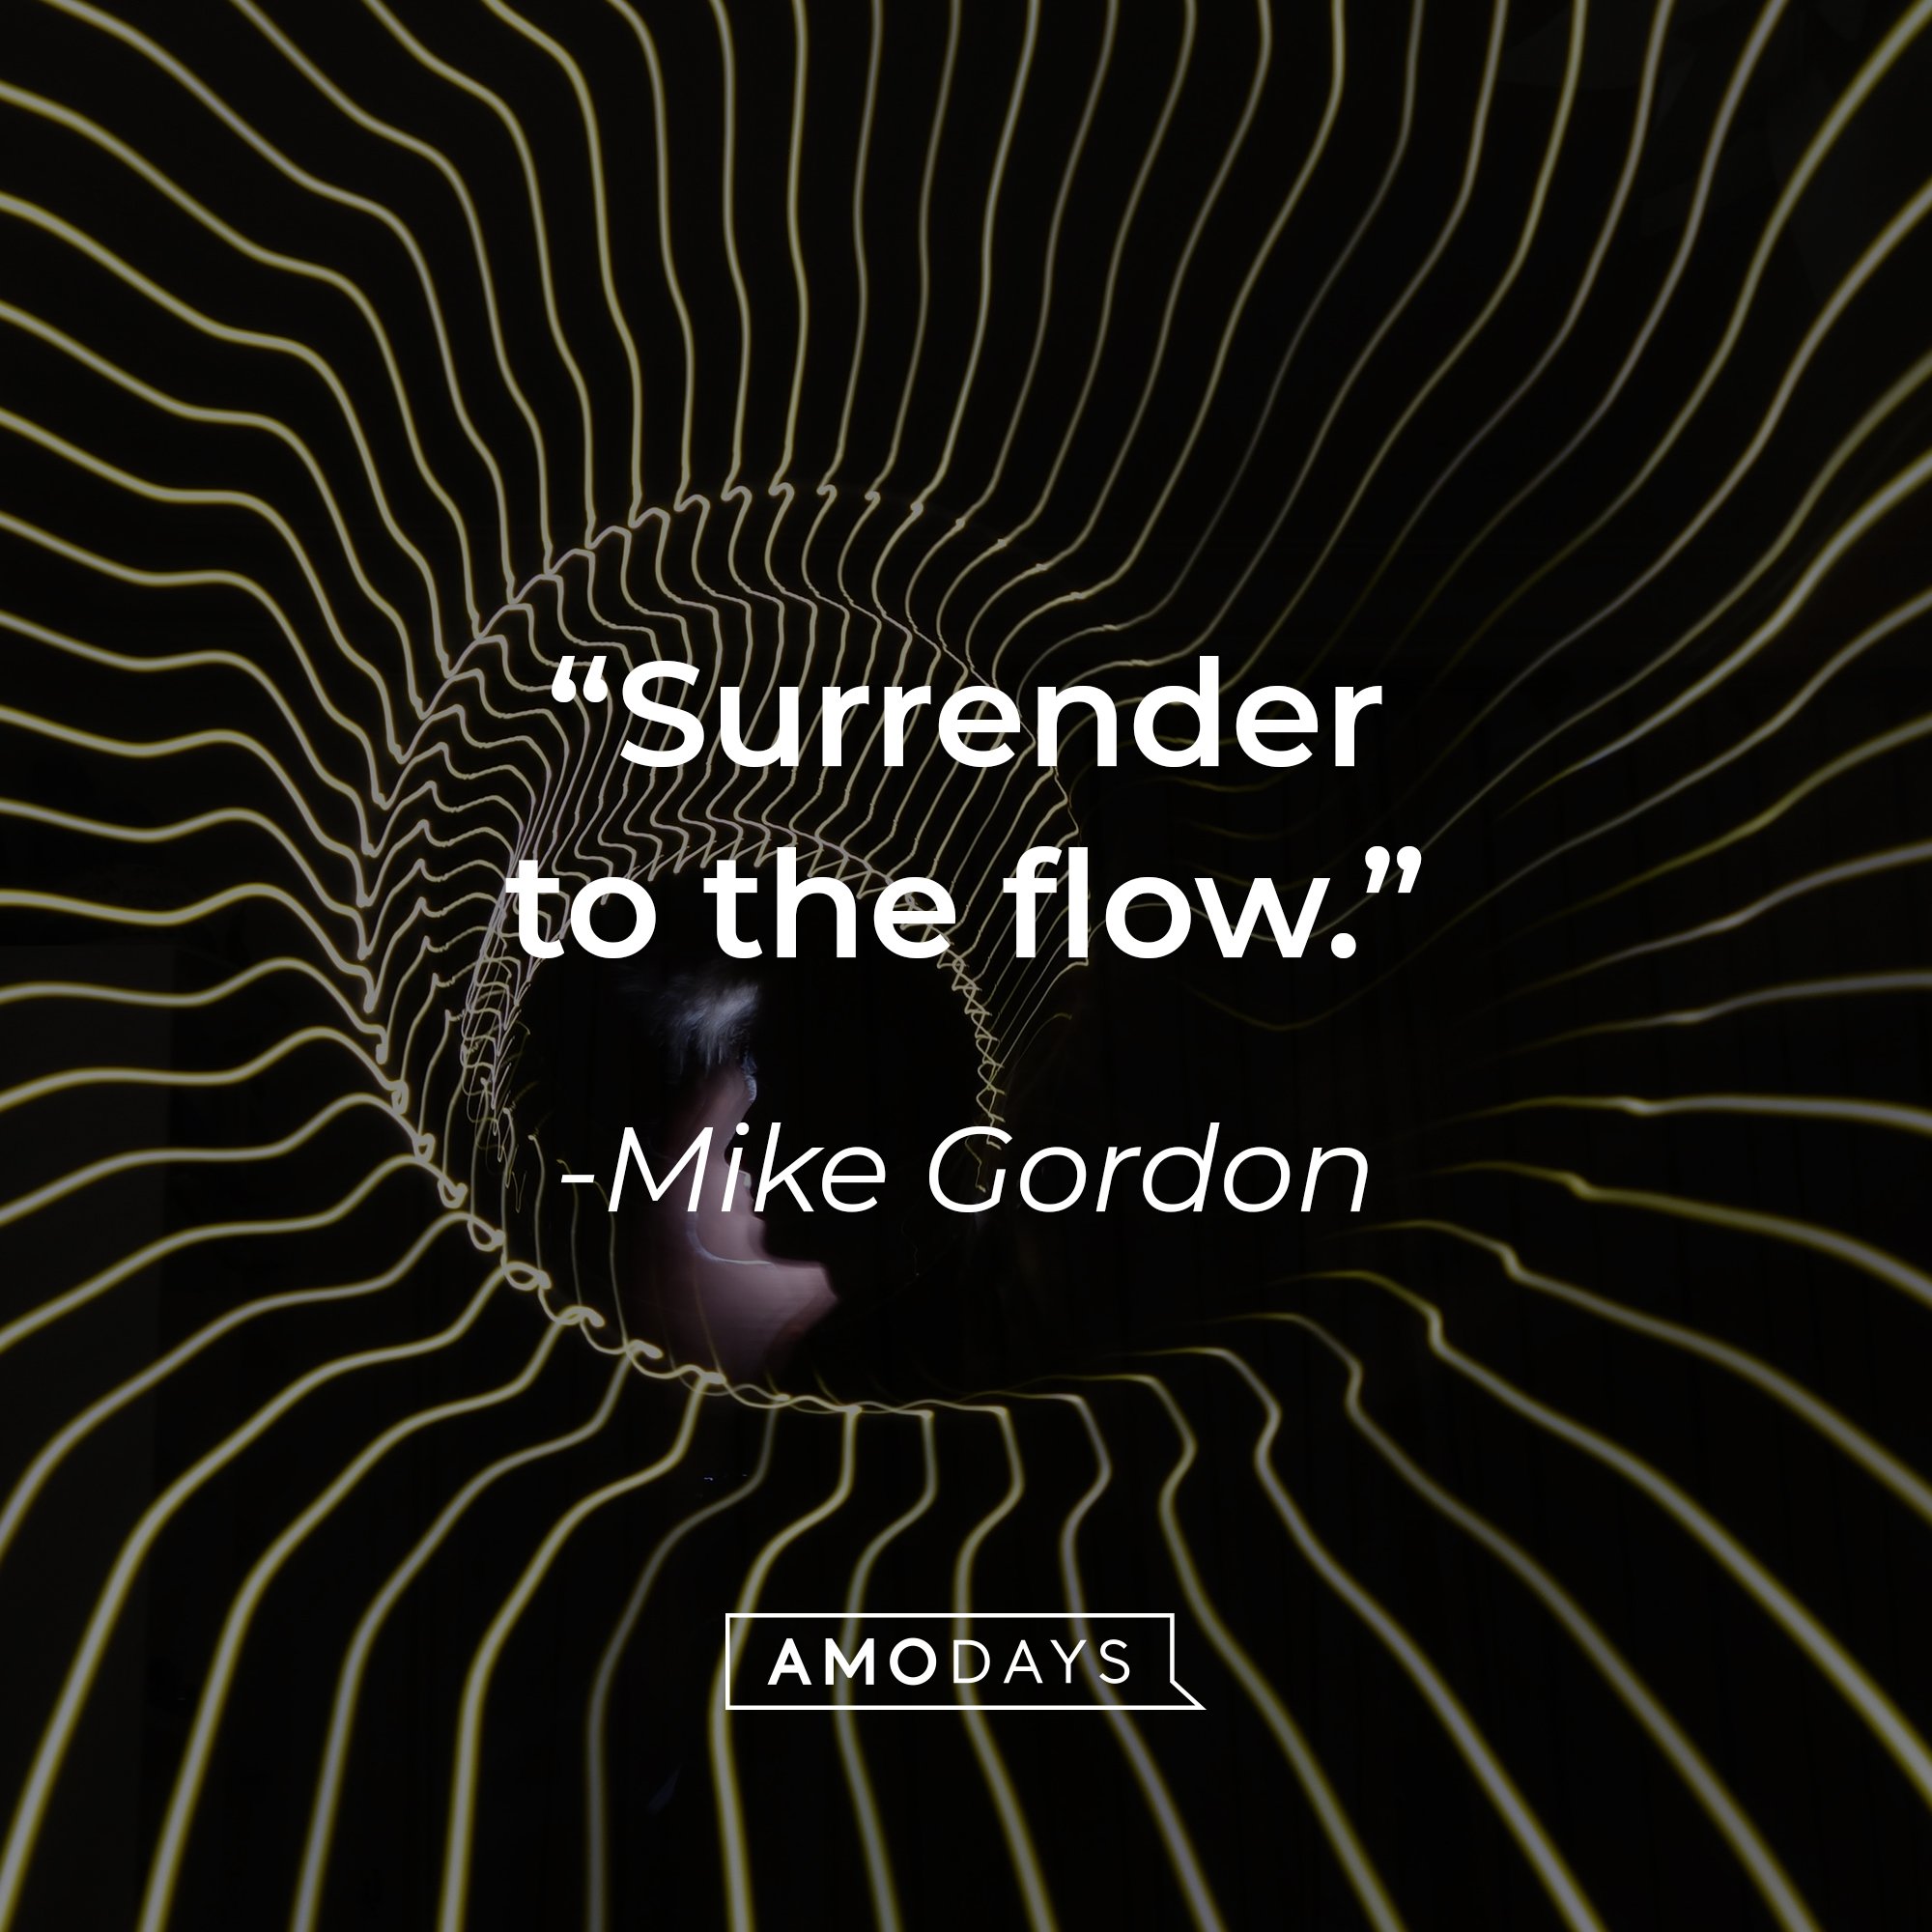 Mike Gordon's quote: "Surrender to the flow." | Image: AmoDays